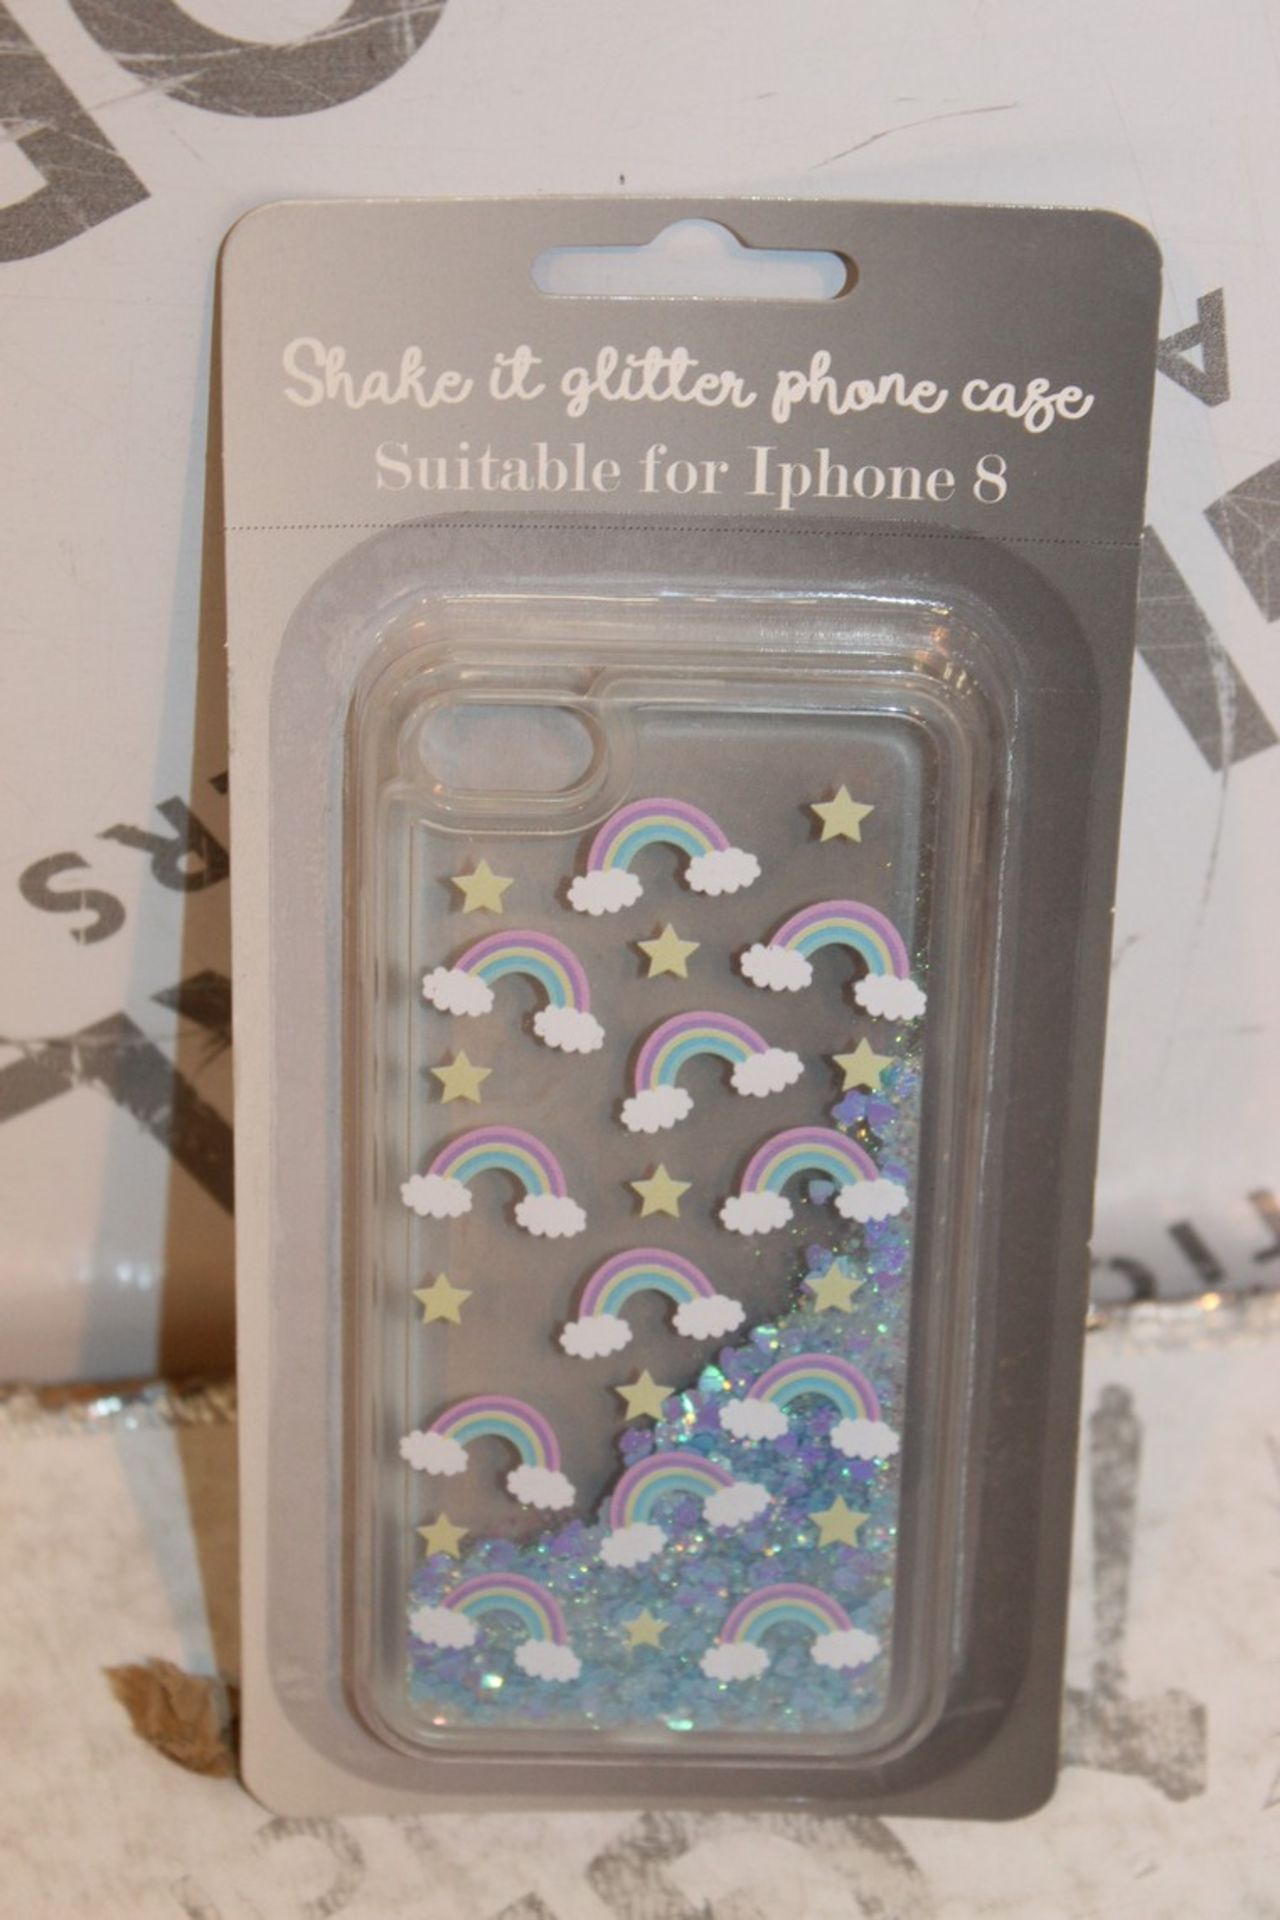 Lot to Contain 24 Brand New iPhone 8 Shake it Glitter Rainbow Phone Cases Combined RRP £120 (